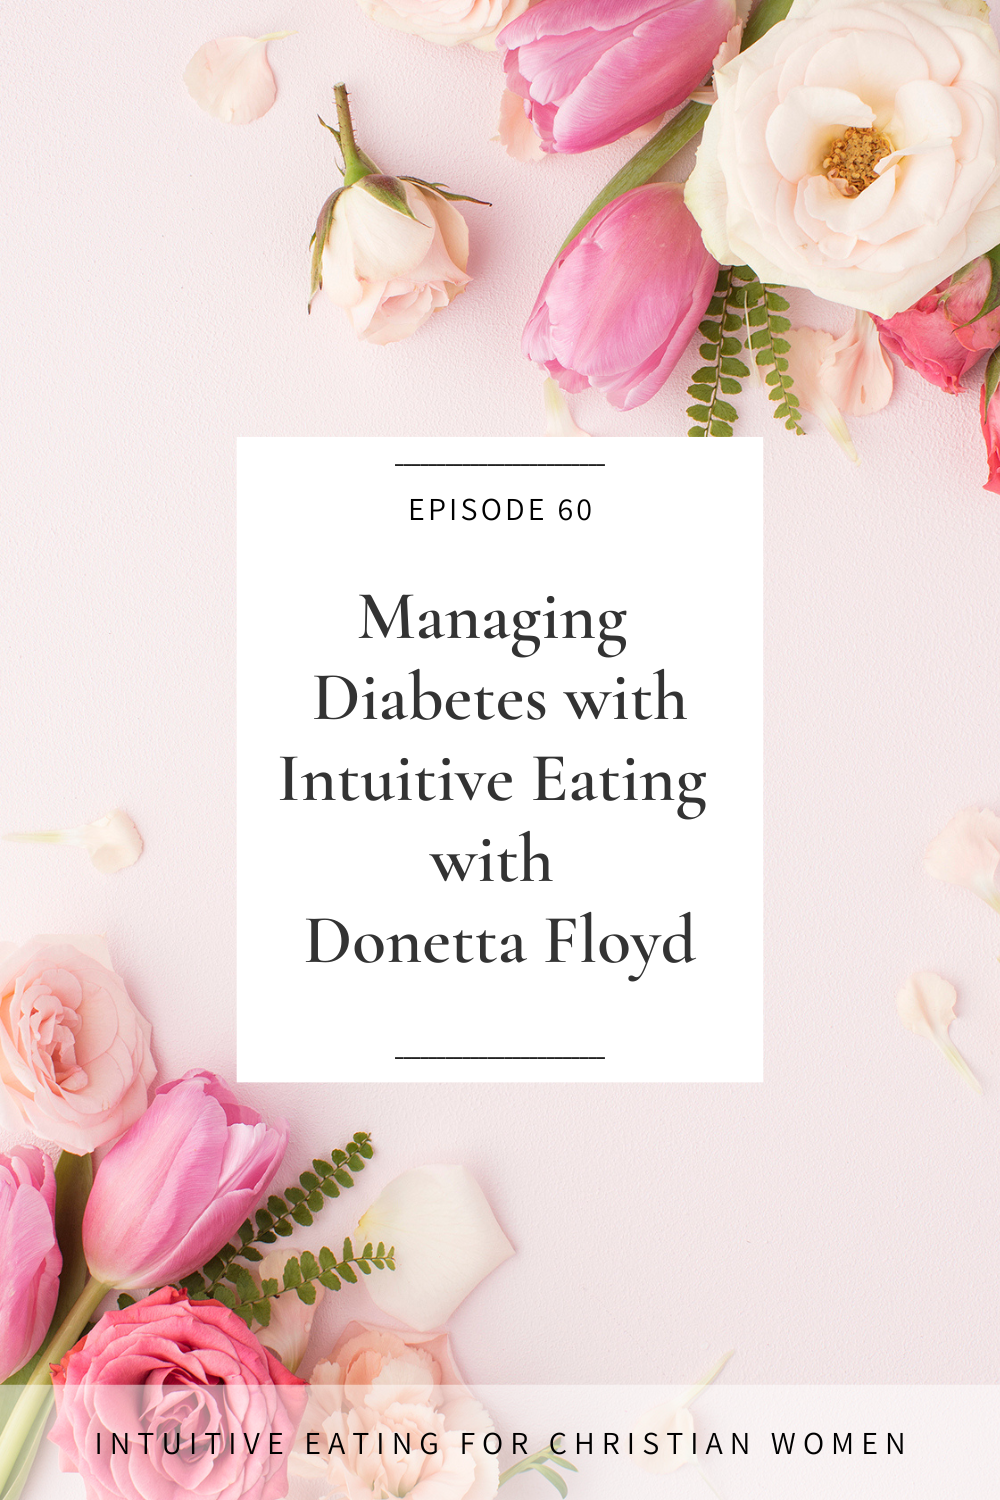 In episode 60 of the of Intuitive Eating for Christian Women podcast our guest Donetta Floyd shares her journey to become a dietitian working with Type 2 Diabetes and eating disorders. We discuss the social determinants of health and take a look at what it’s like to manage diabetes with intuitive eating.